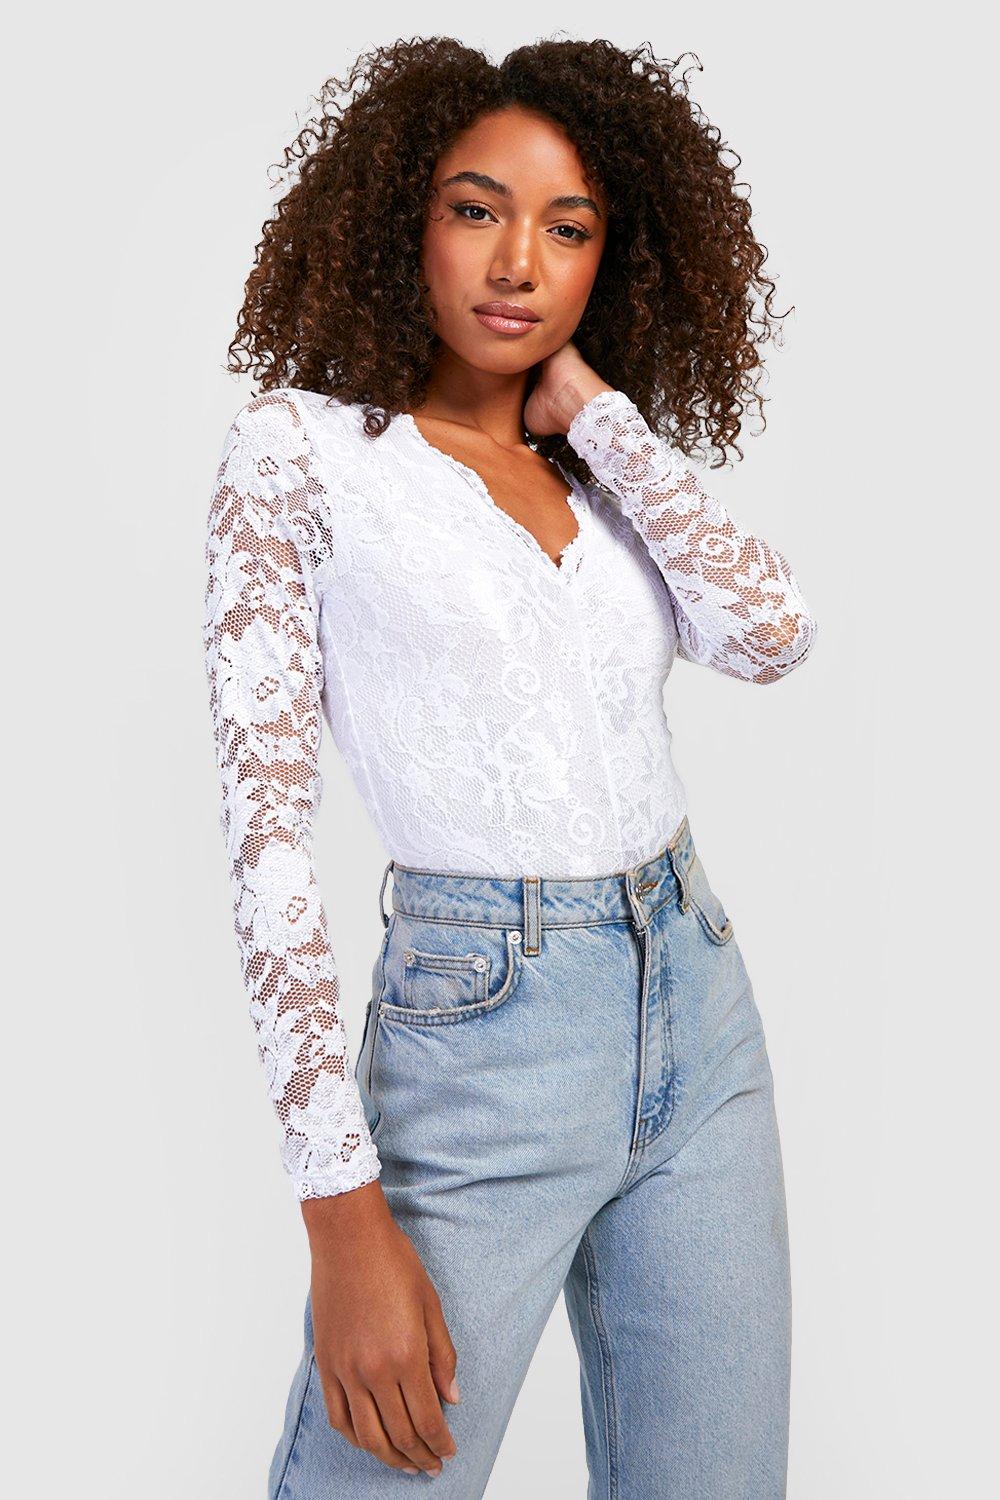 Tall Lace Long Sleeved Bodysuit